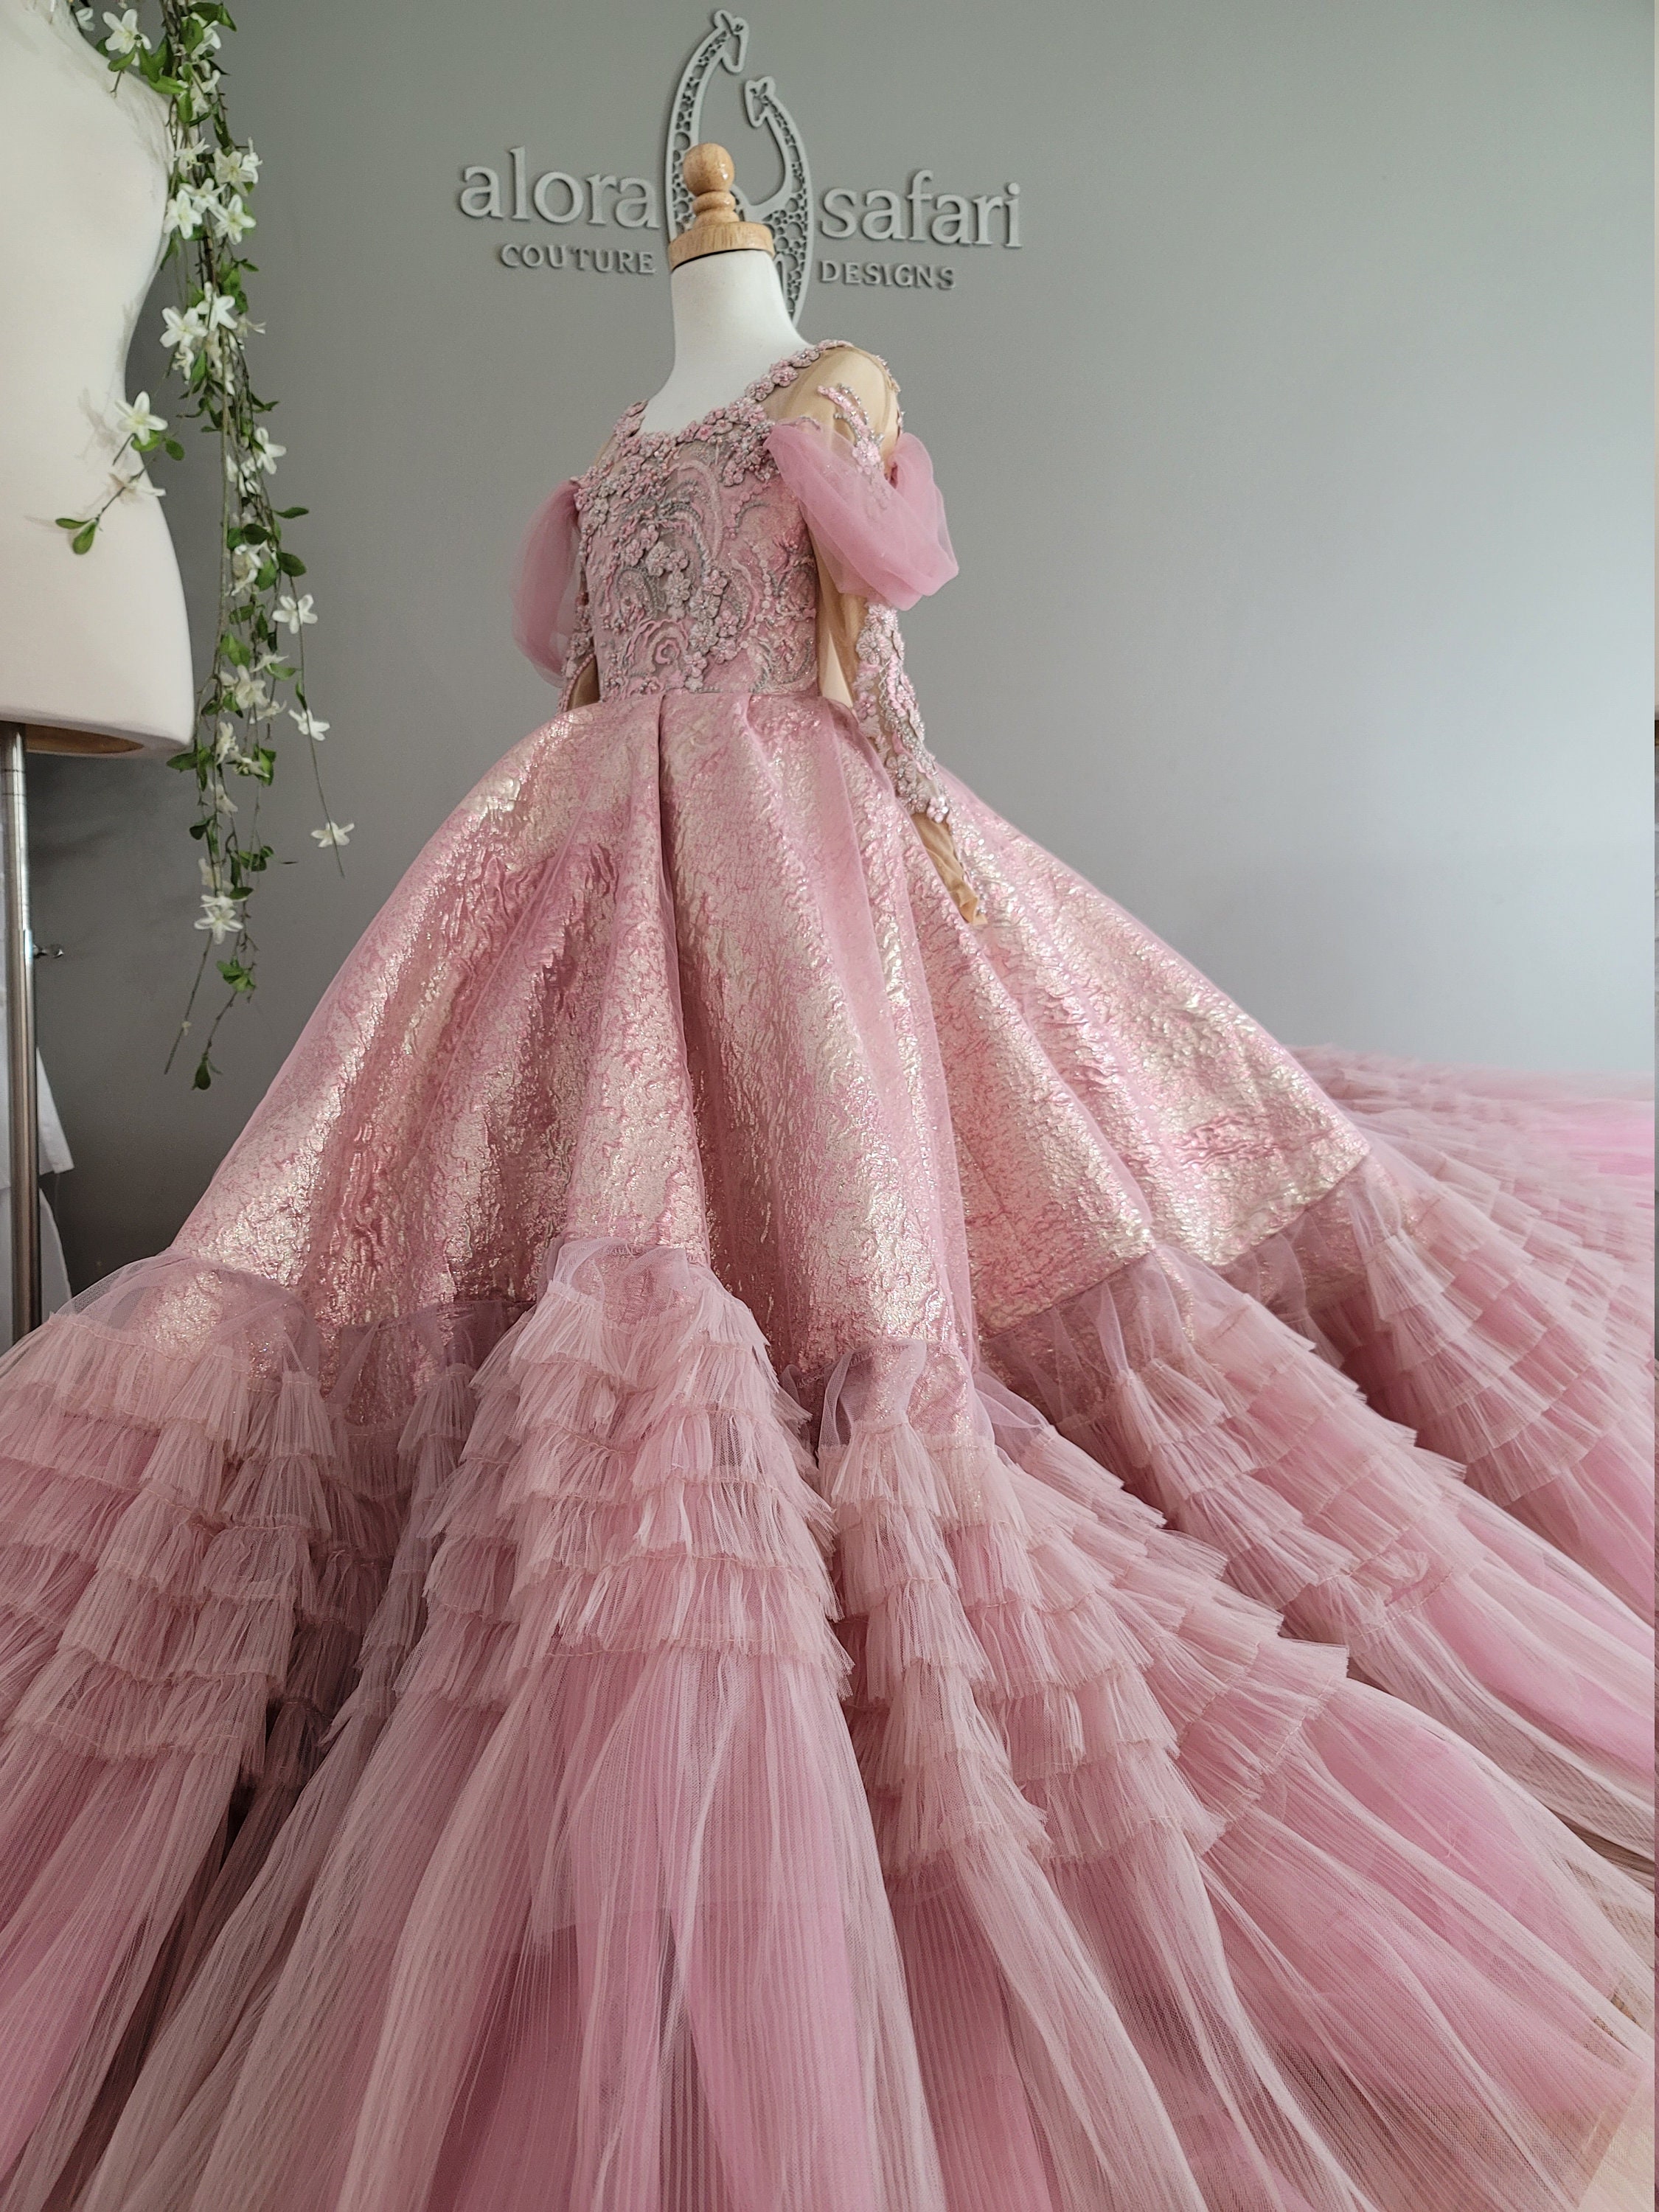 Showy pink off the shoulder princess ball gown wedding/prom dress with  tiered ruffled skirt - various styles